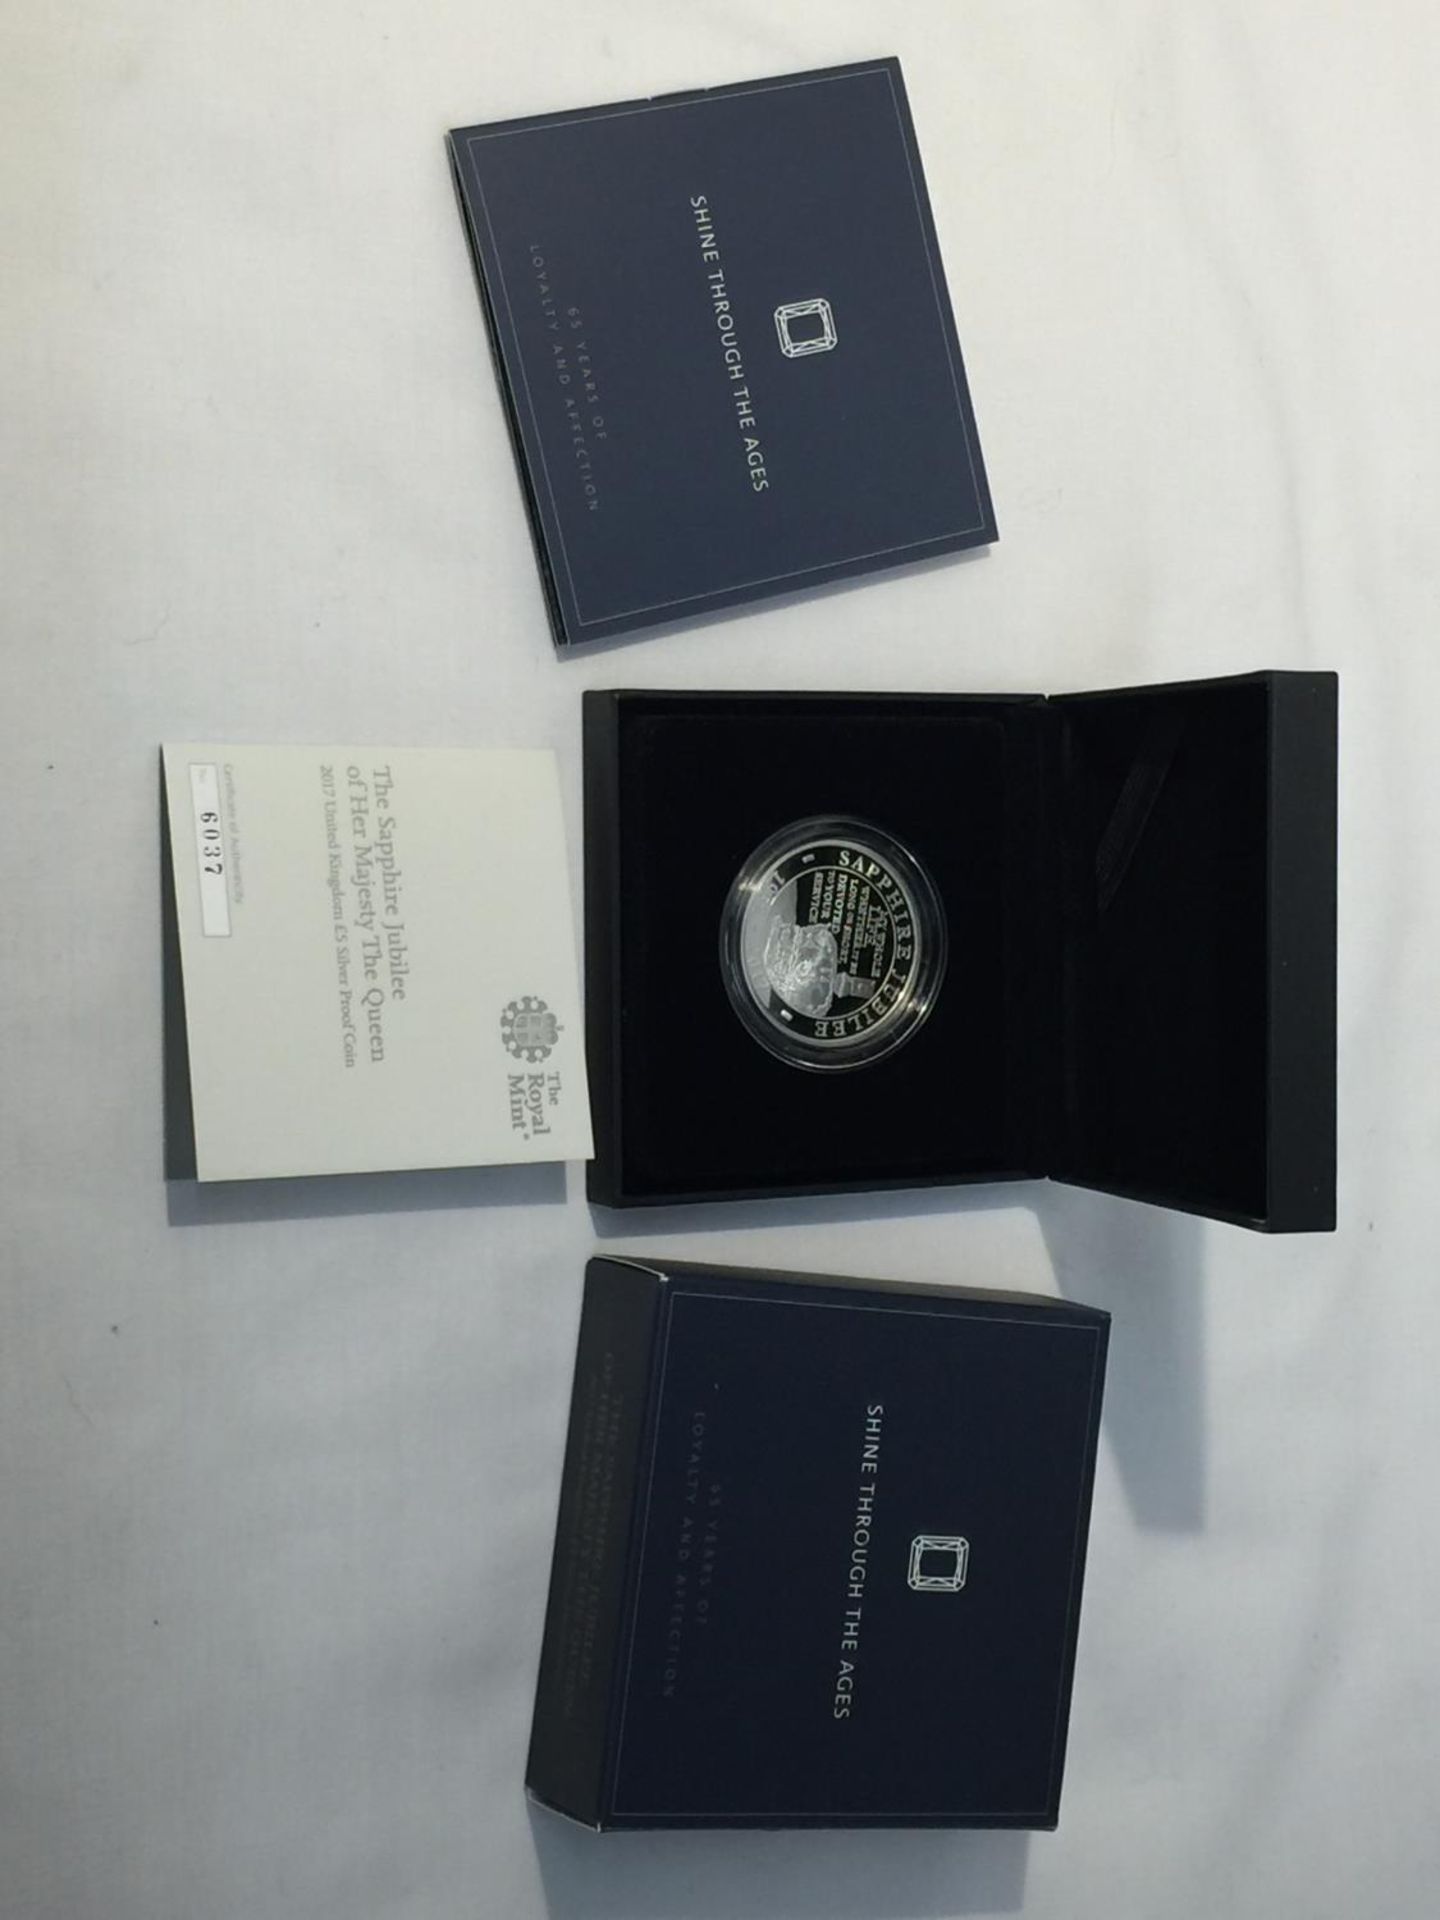 A UNITED KINGDOM ROYAL MINT 2017 “THE SAPPHIRE JUBILEE” SILVER PROOF £5 COIN, WITH COA